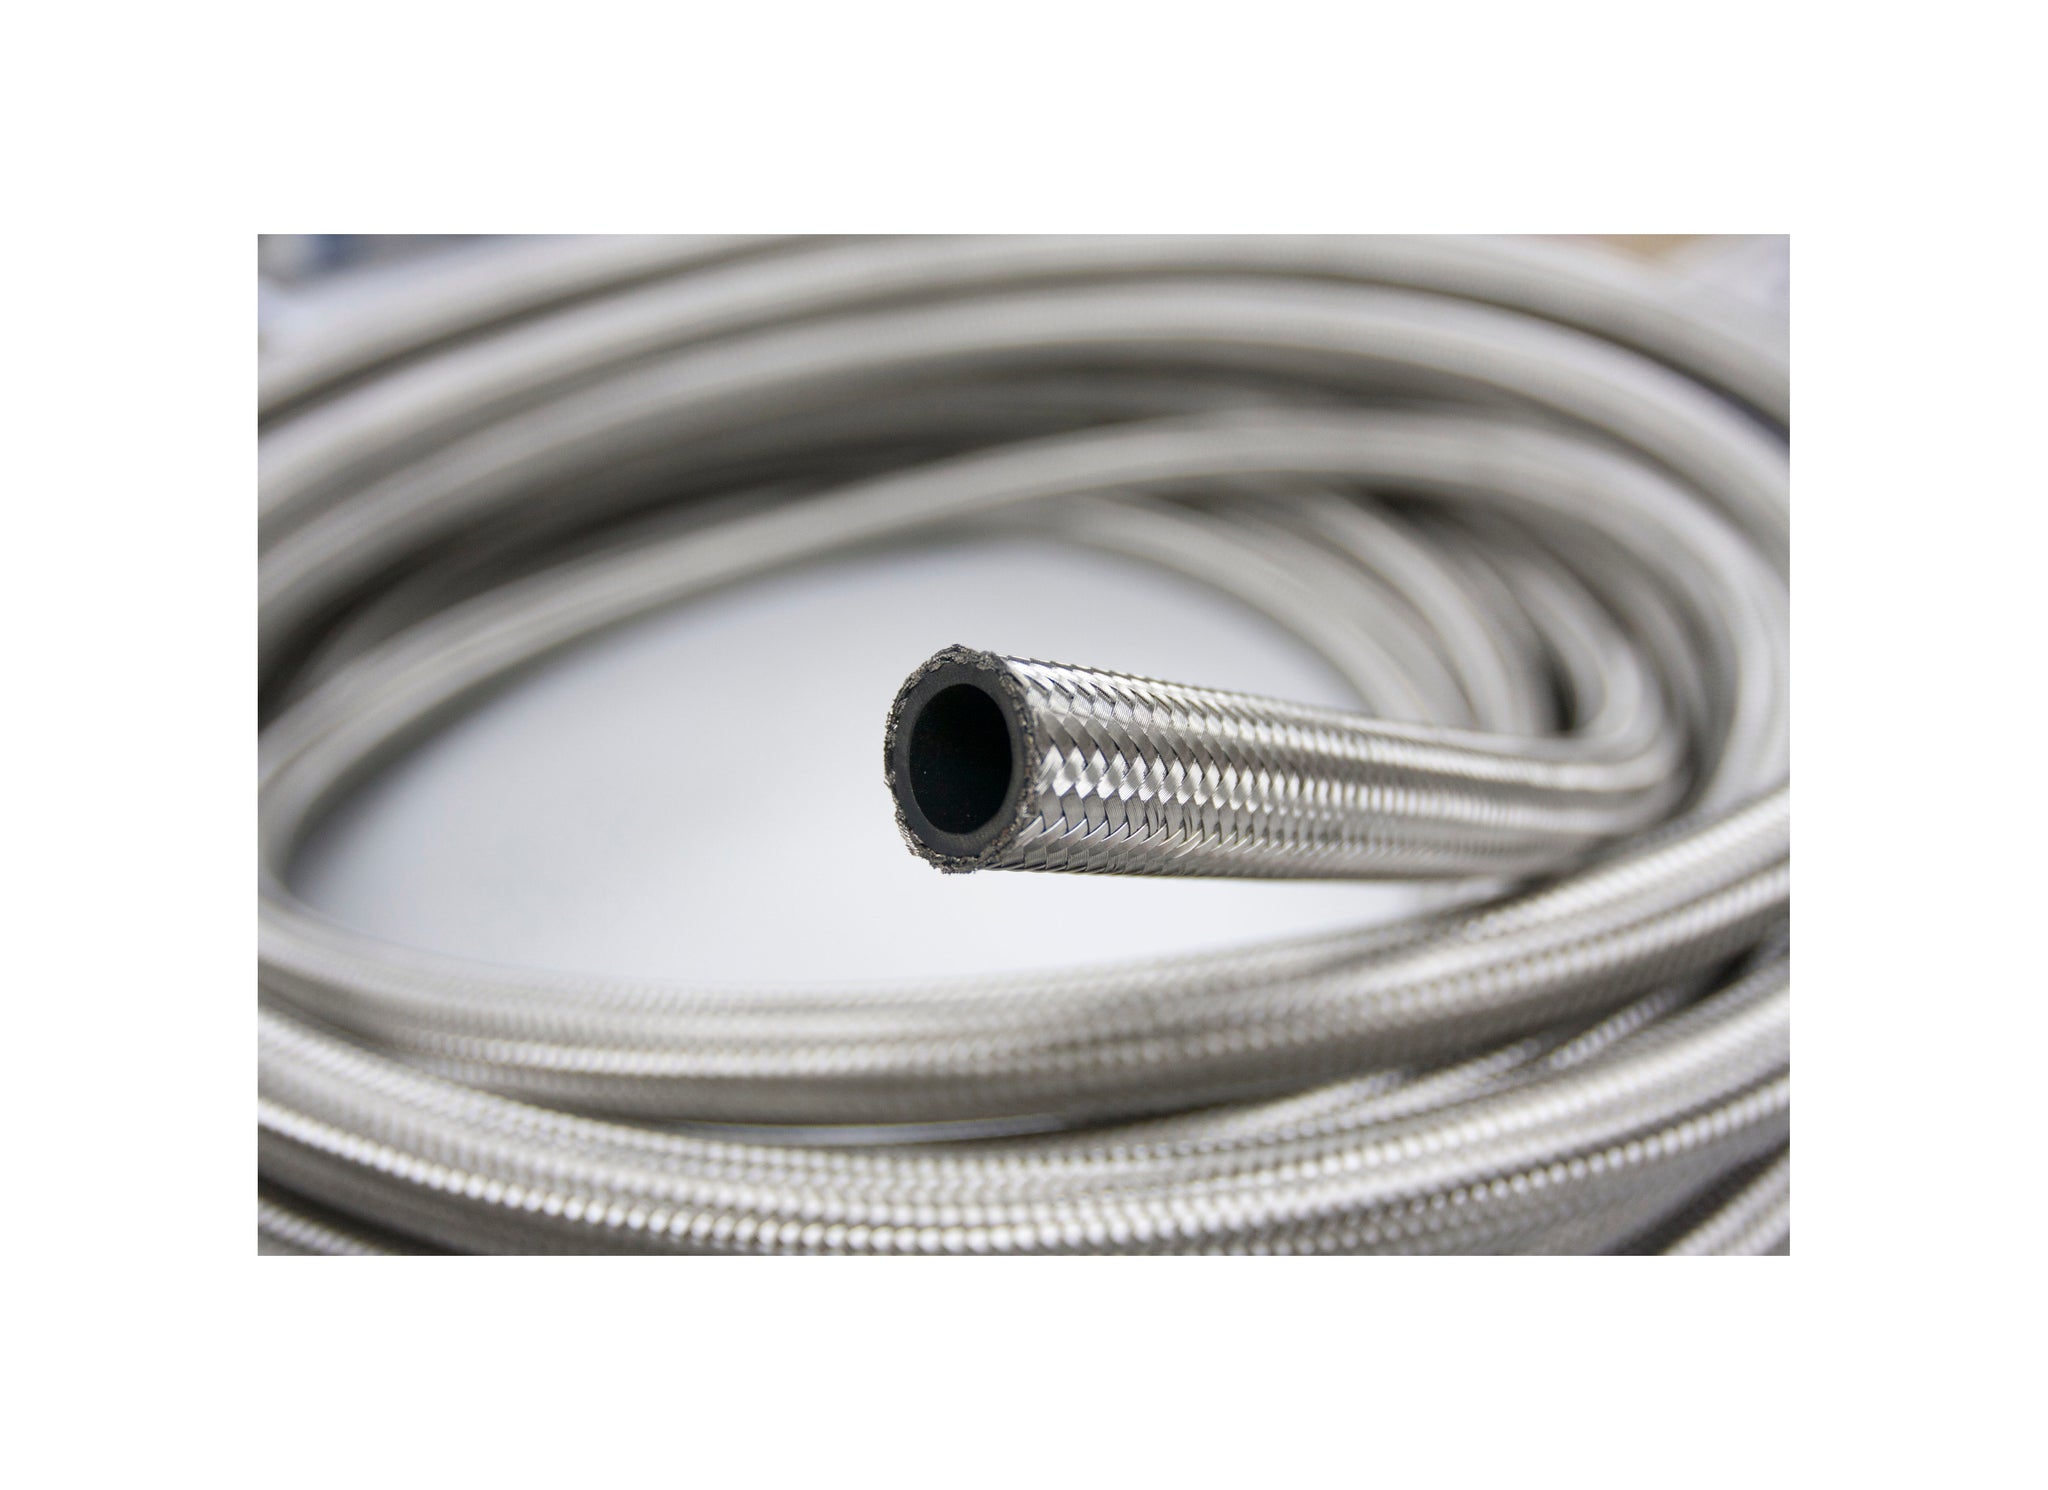 Stainless Steel Braided Fuel Oil Gasoline Hose Line by 1 Meter, Silver –  Autobahn88 Web Store